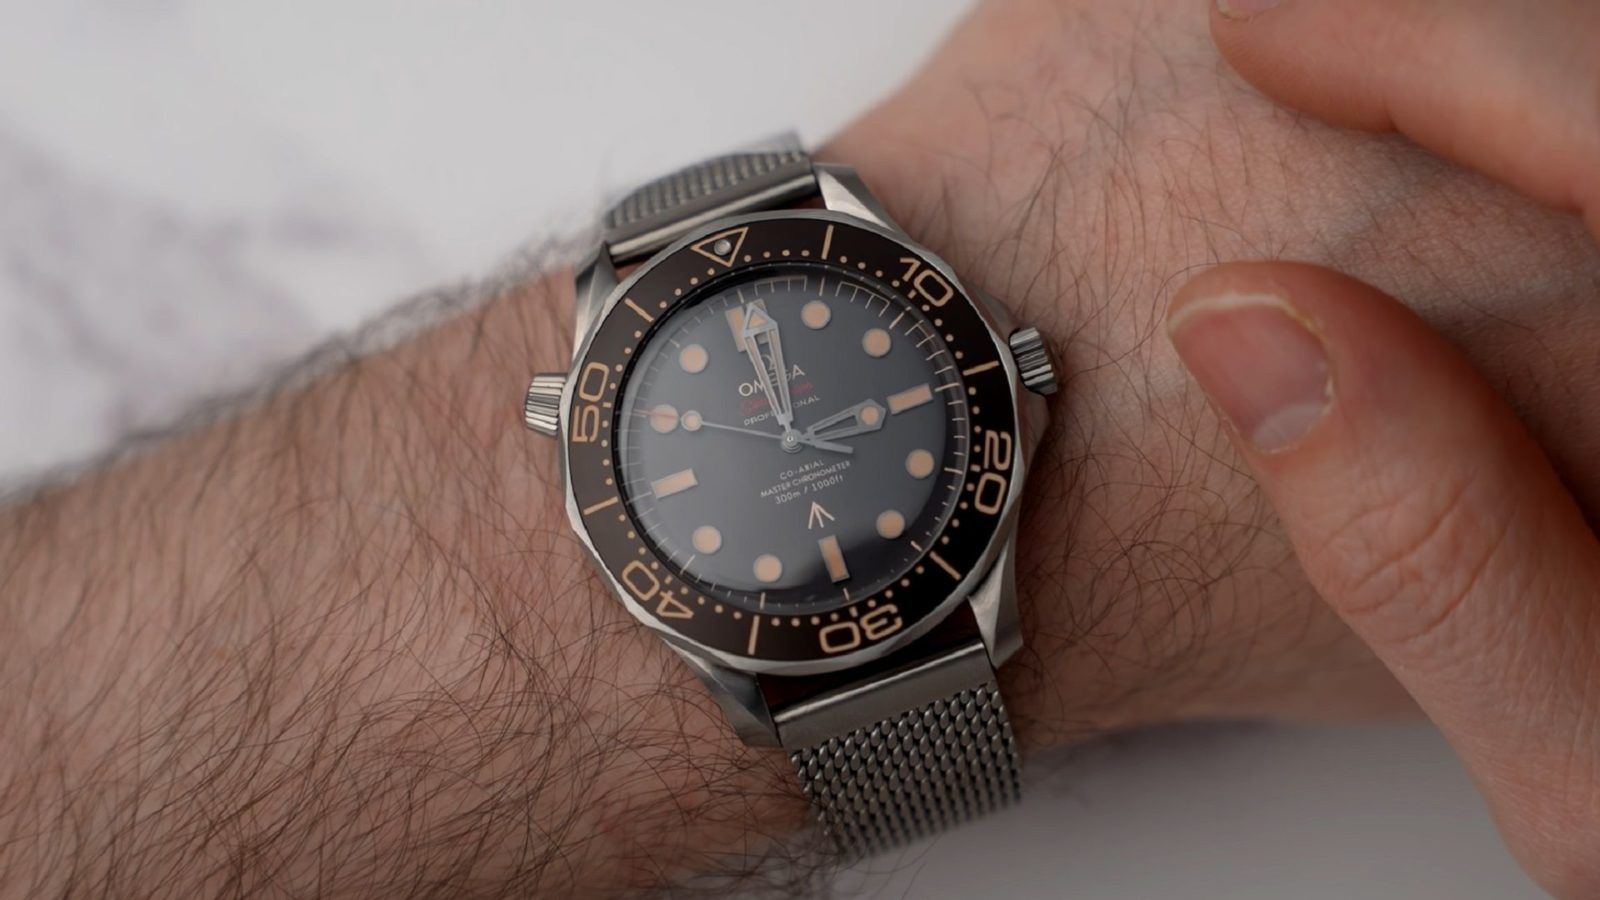 Watch YouTubers changing the game of selling luxury timepieces